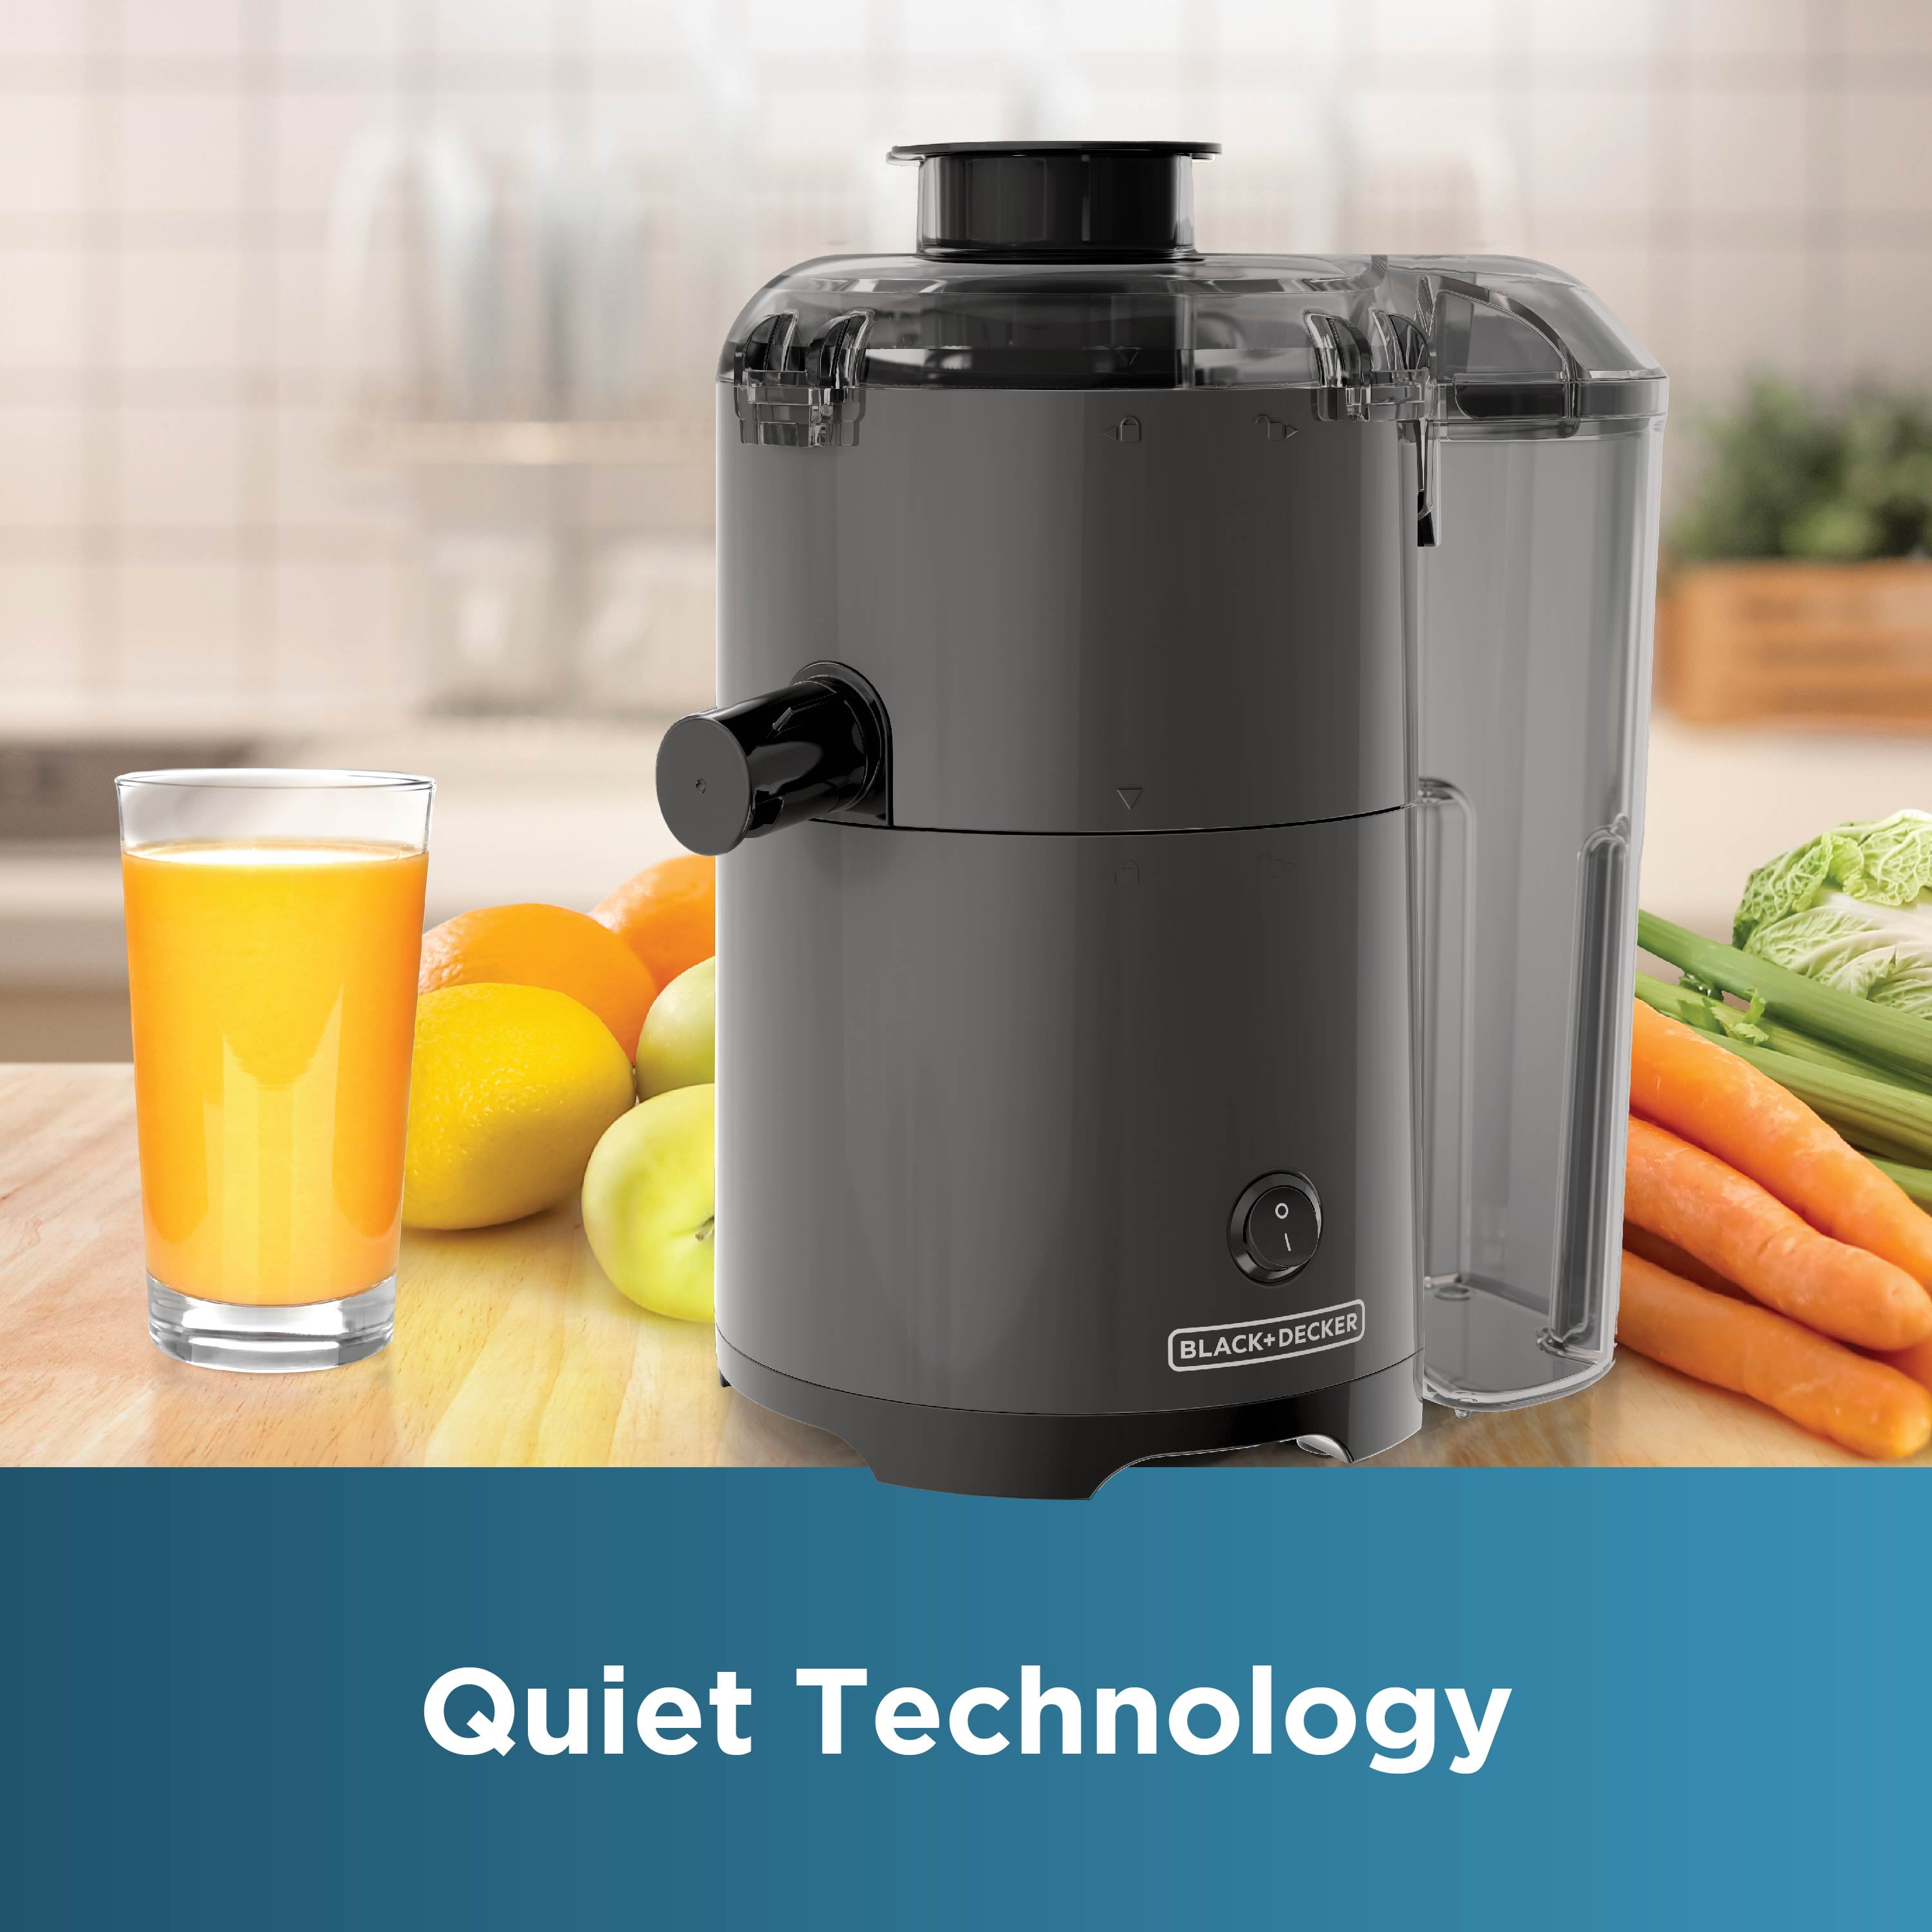 Black and Decker juice extractor is only $40 at Walmart